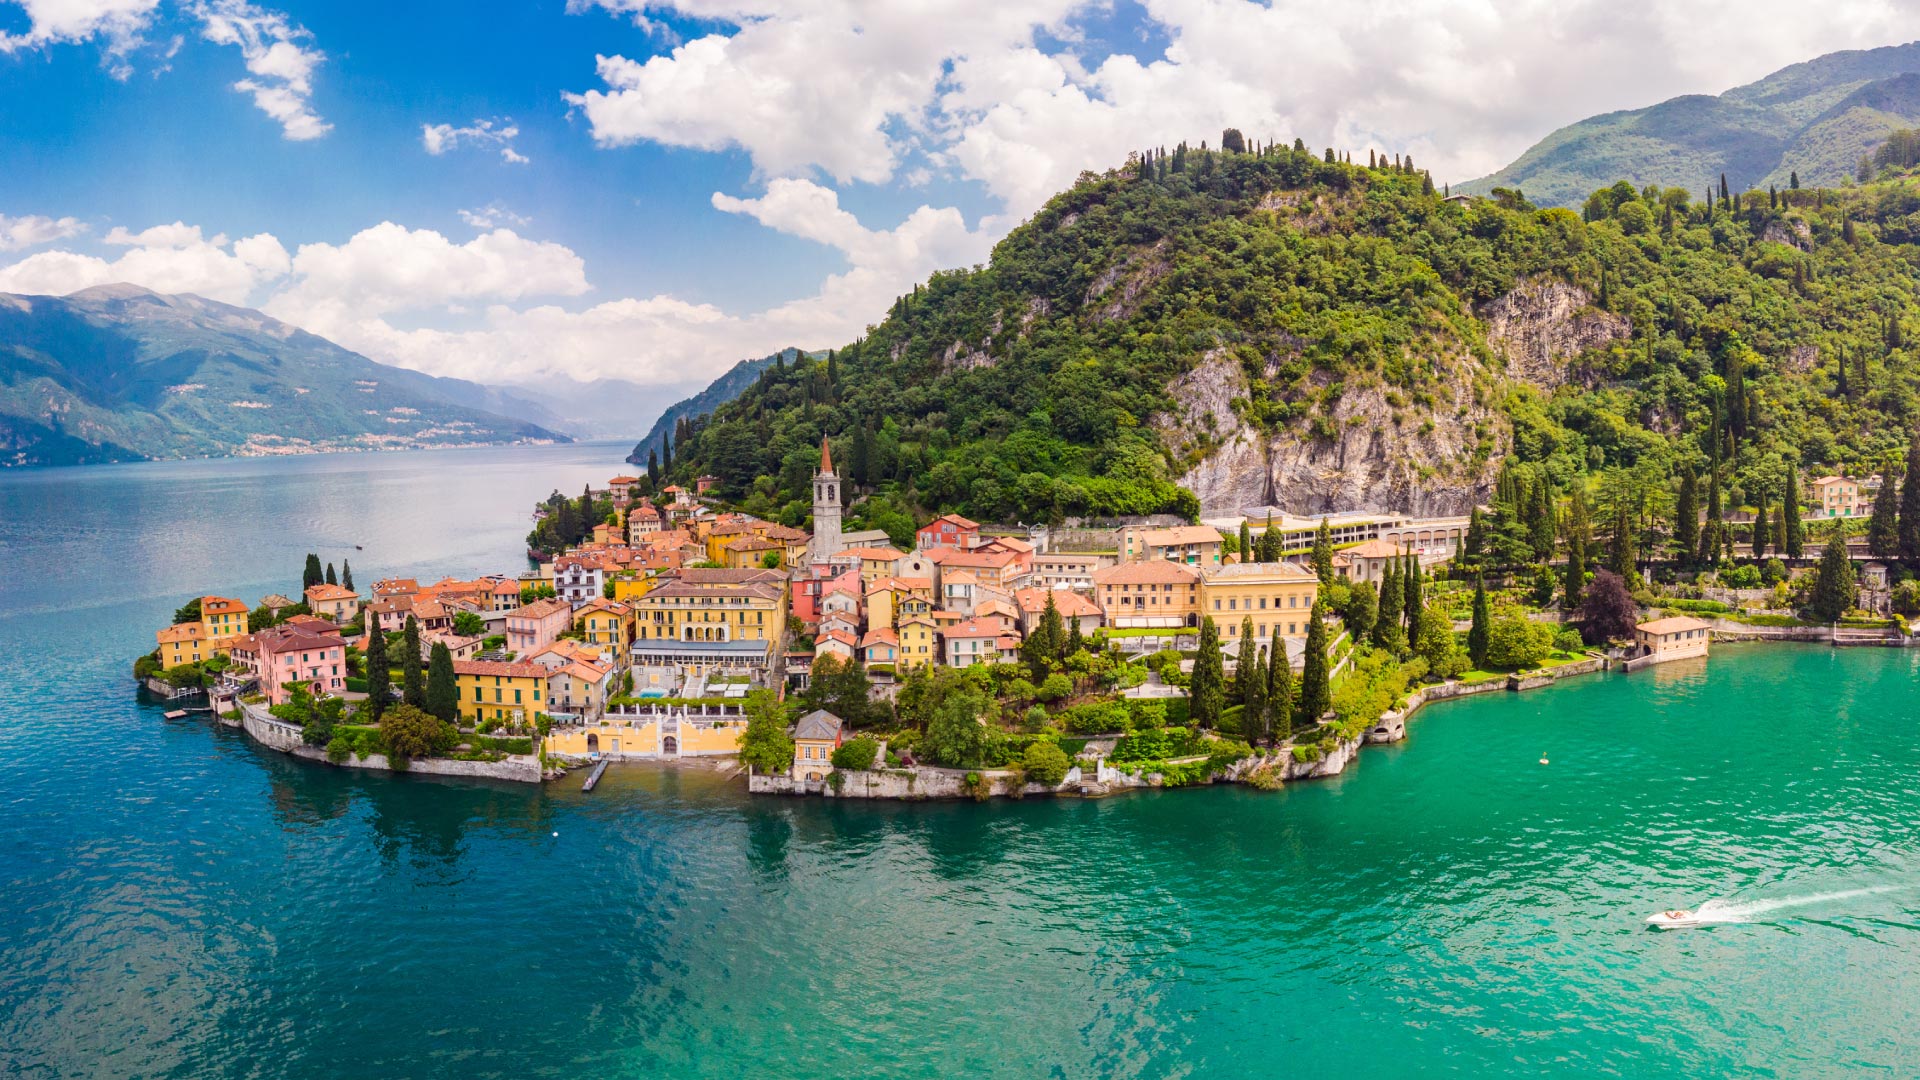 Capture the beauty of Lake Como in Italy, a captivating stop on the journey to Australia spanning 21 countries, curated for self-flying pilots. Immerse yourself in the picturesque landscapes and charming villages along the shores of this iconic Italian lake.